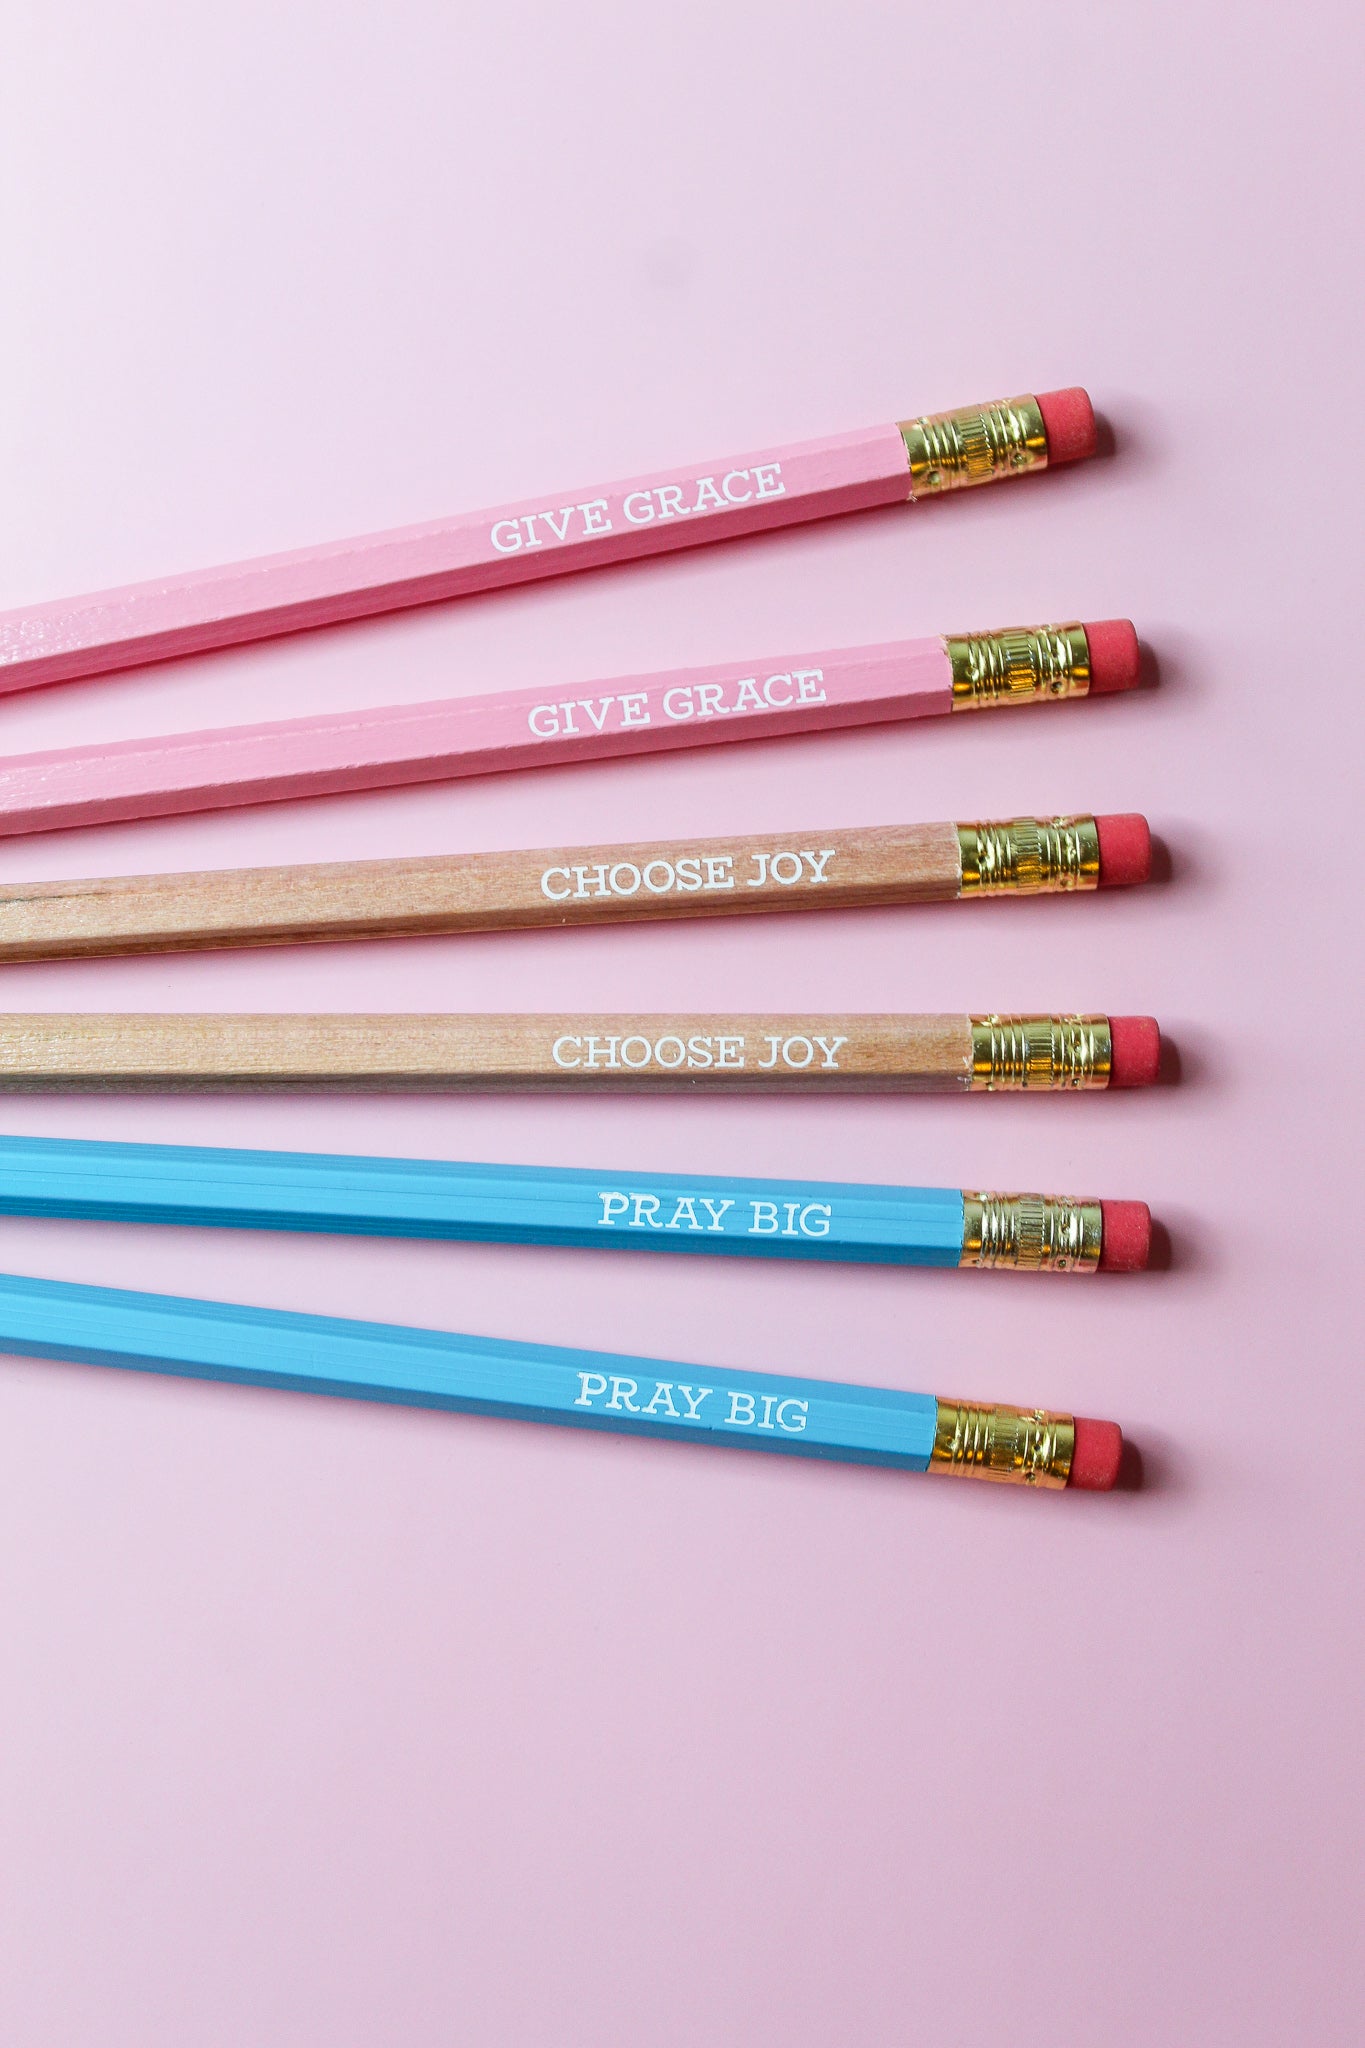 Give Grace, Choose Joy, Pray Big Pencil Set is a hopeful Pencil Set that has six pencils: two pink pencils imprinted with "give grace", two natural wood pencils imprinted with "choose joy" and two blue pencils imprinted with "pray big. 